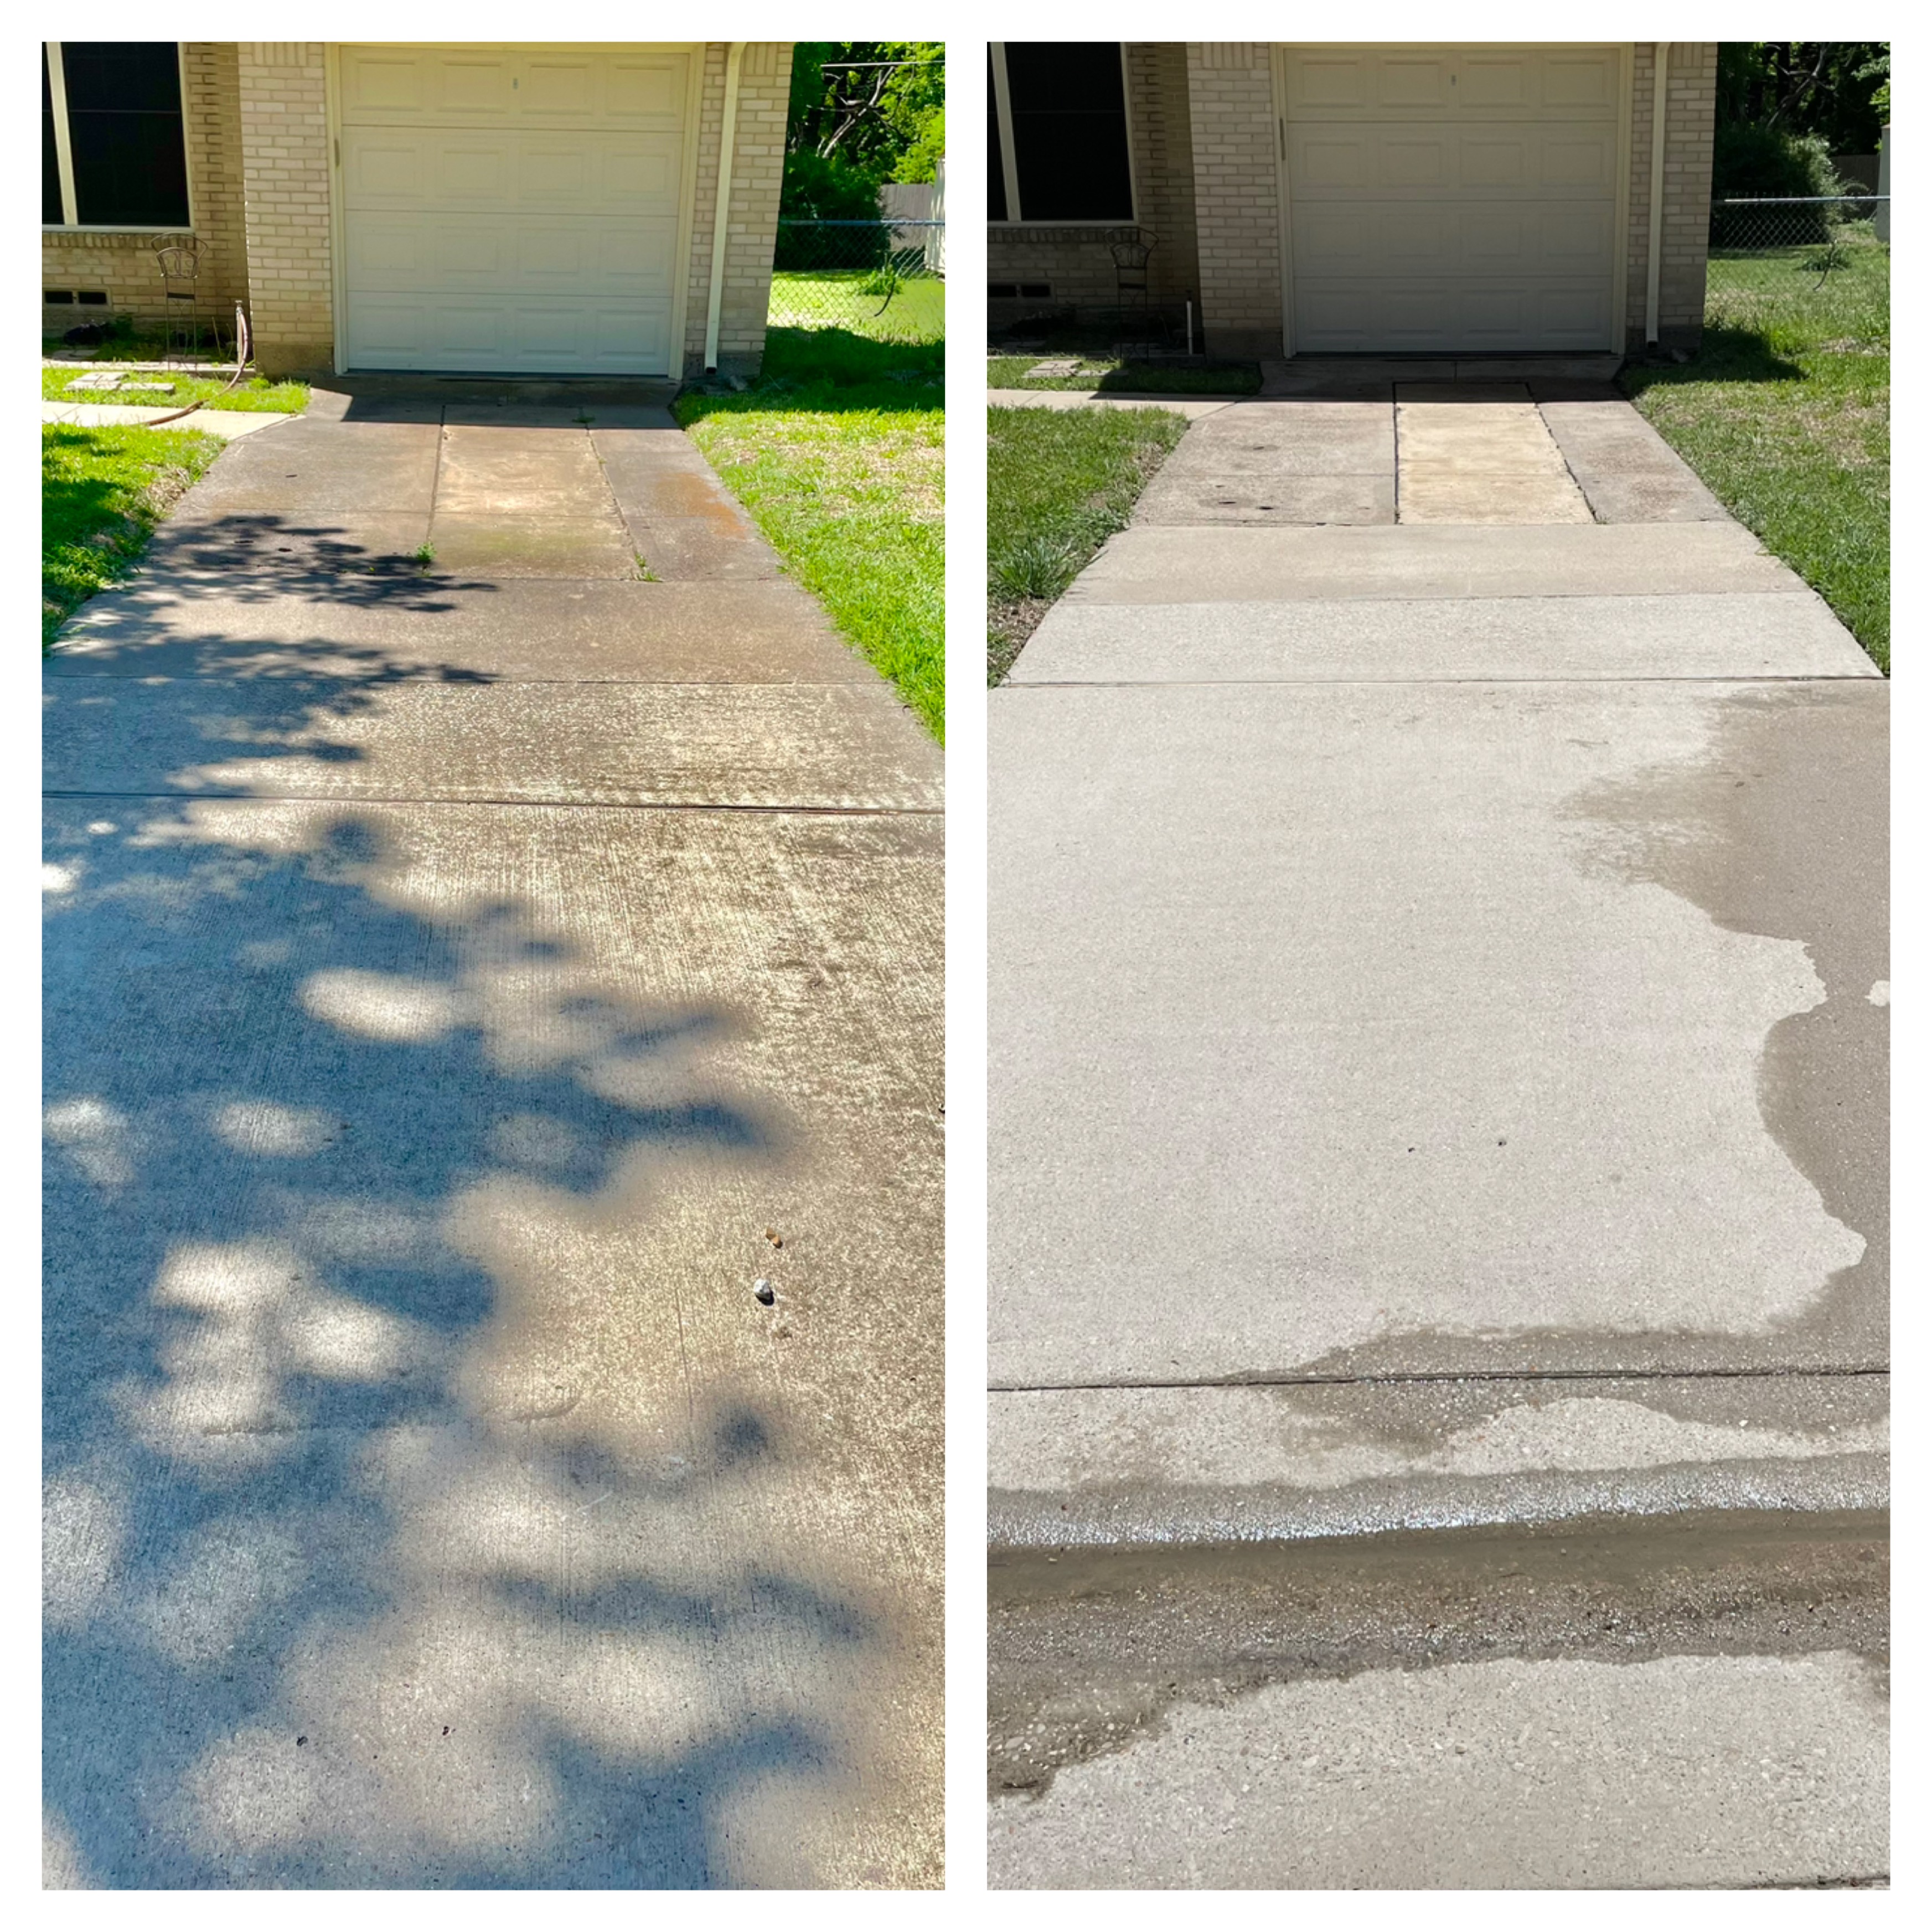 This Concrete Has Never Been Cleaned Before! Driveway Washing in McKinney, Tx Thumbnail